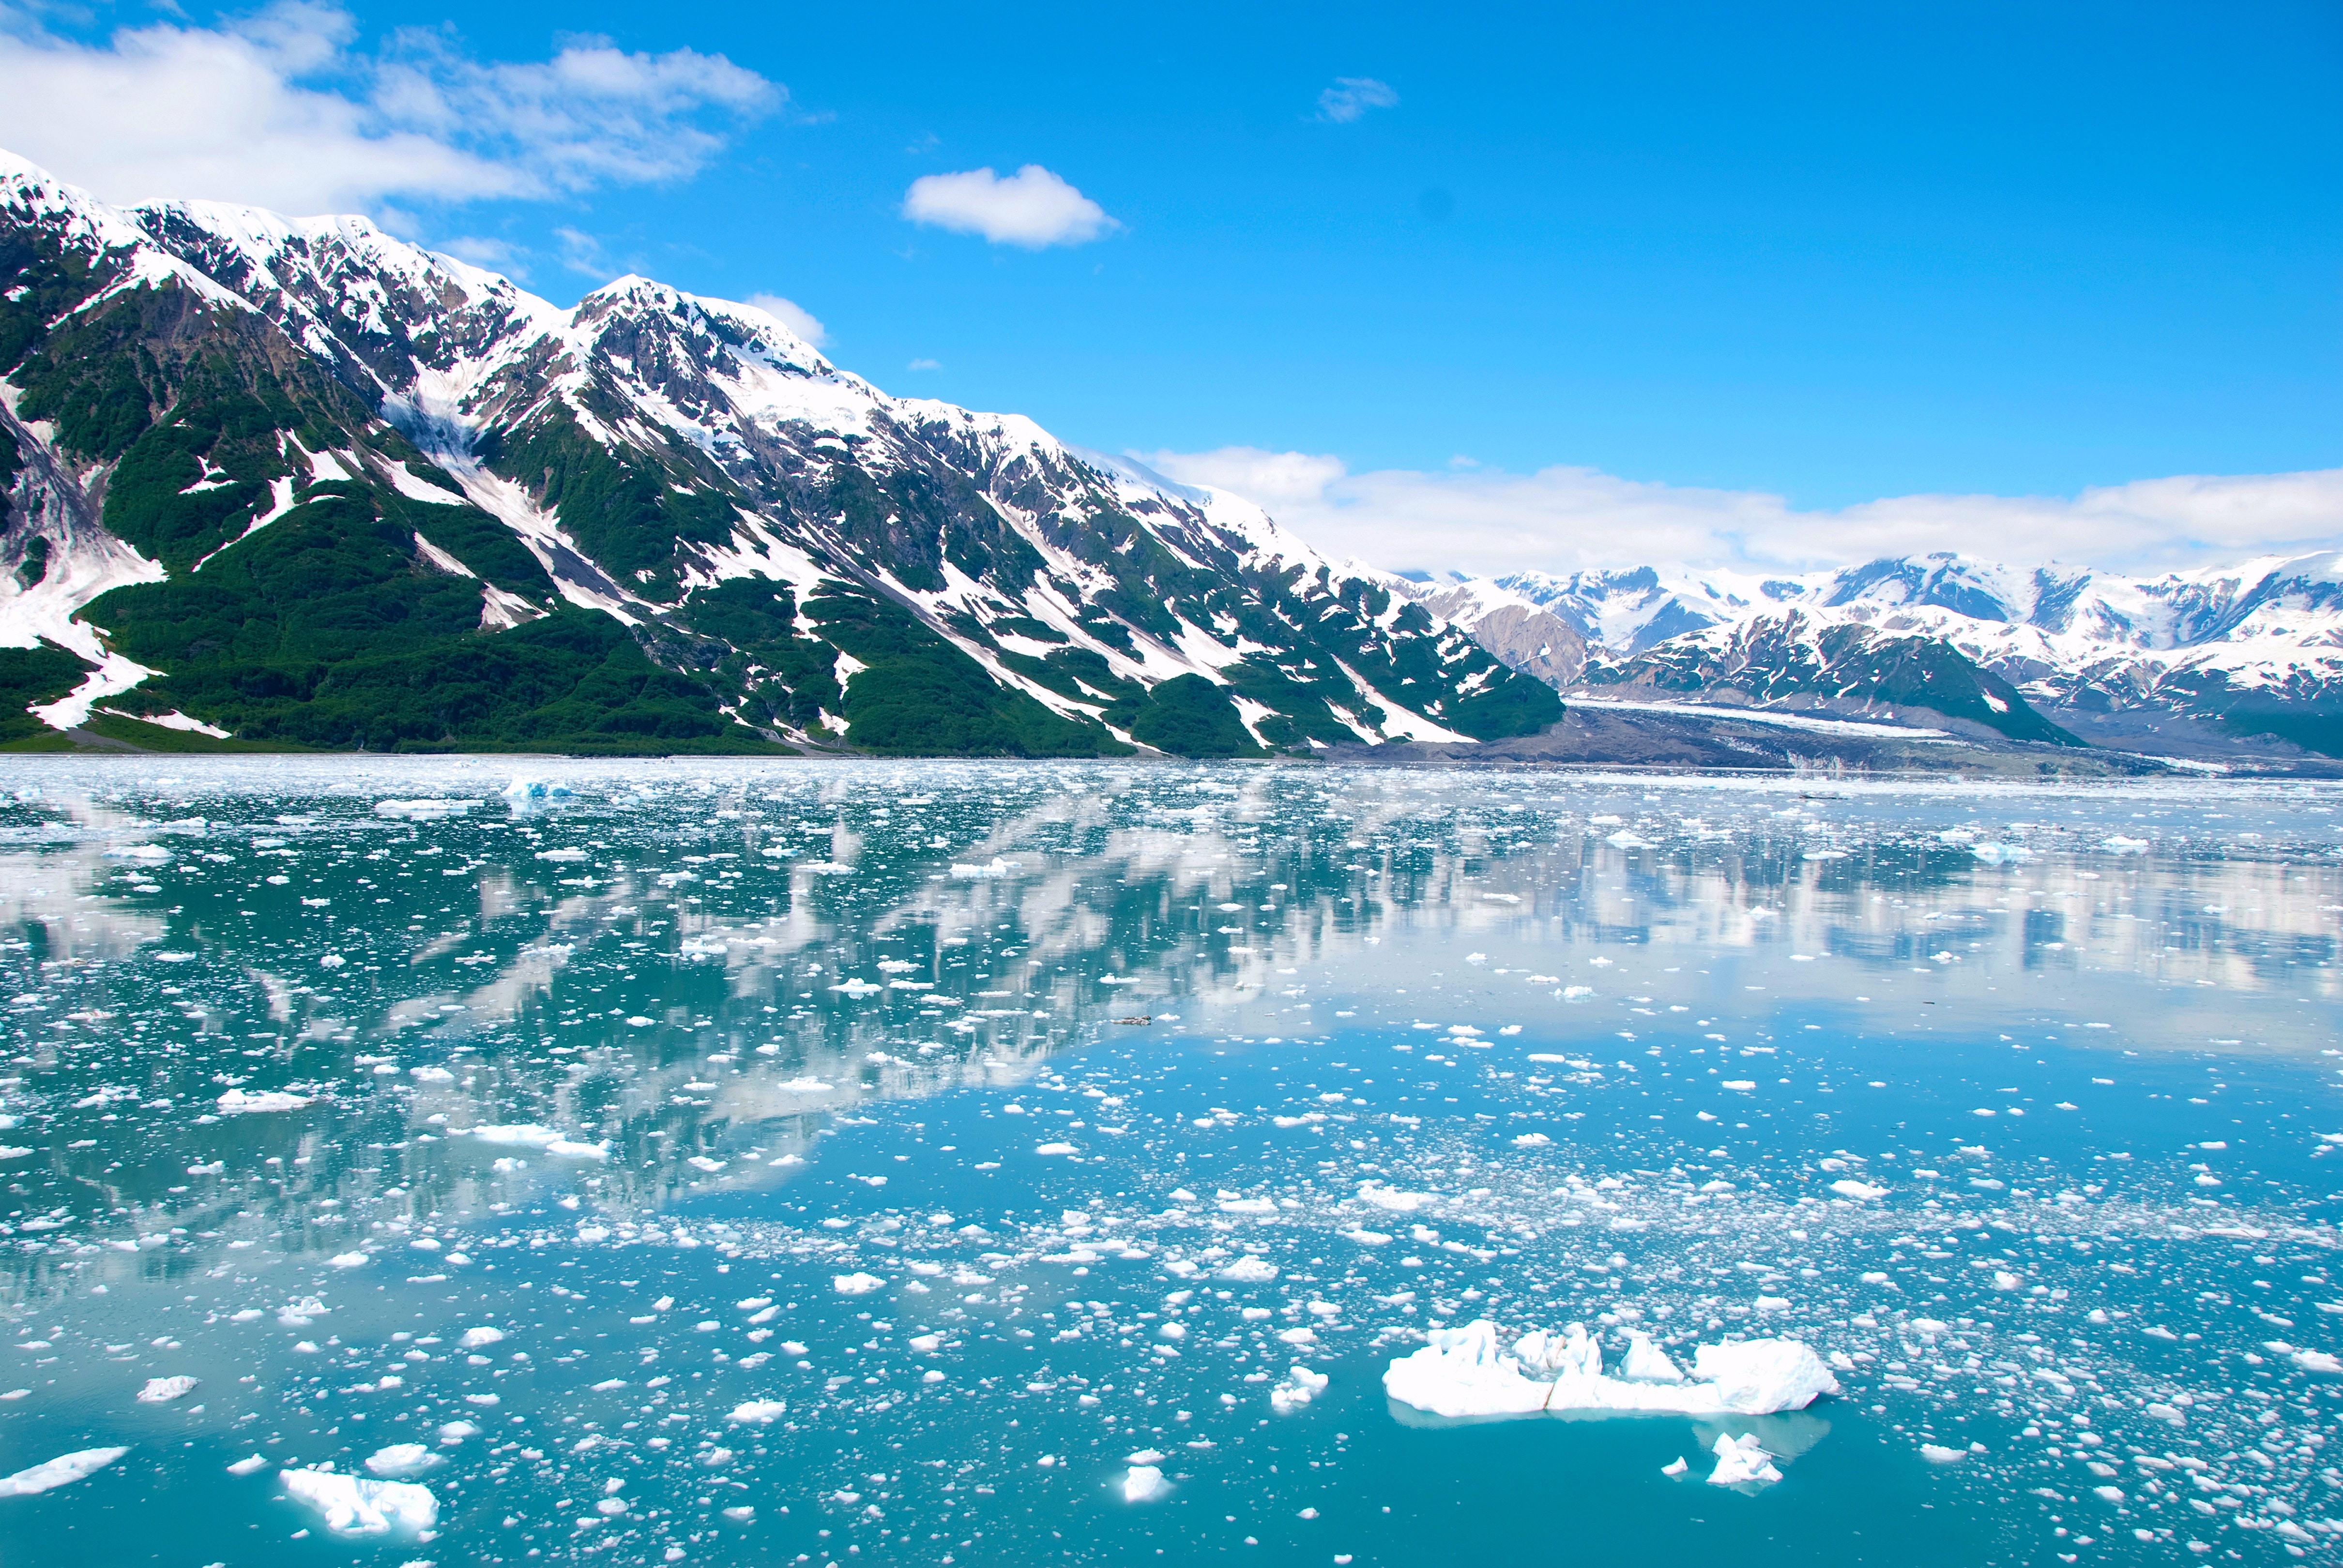 9 amazing facts about Alaska to know before your visit